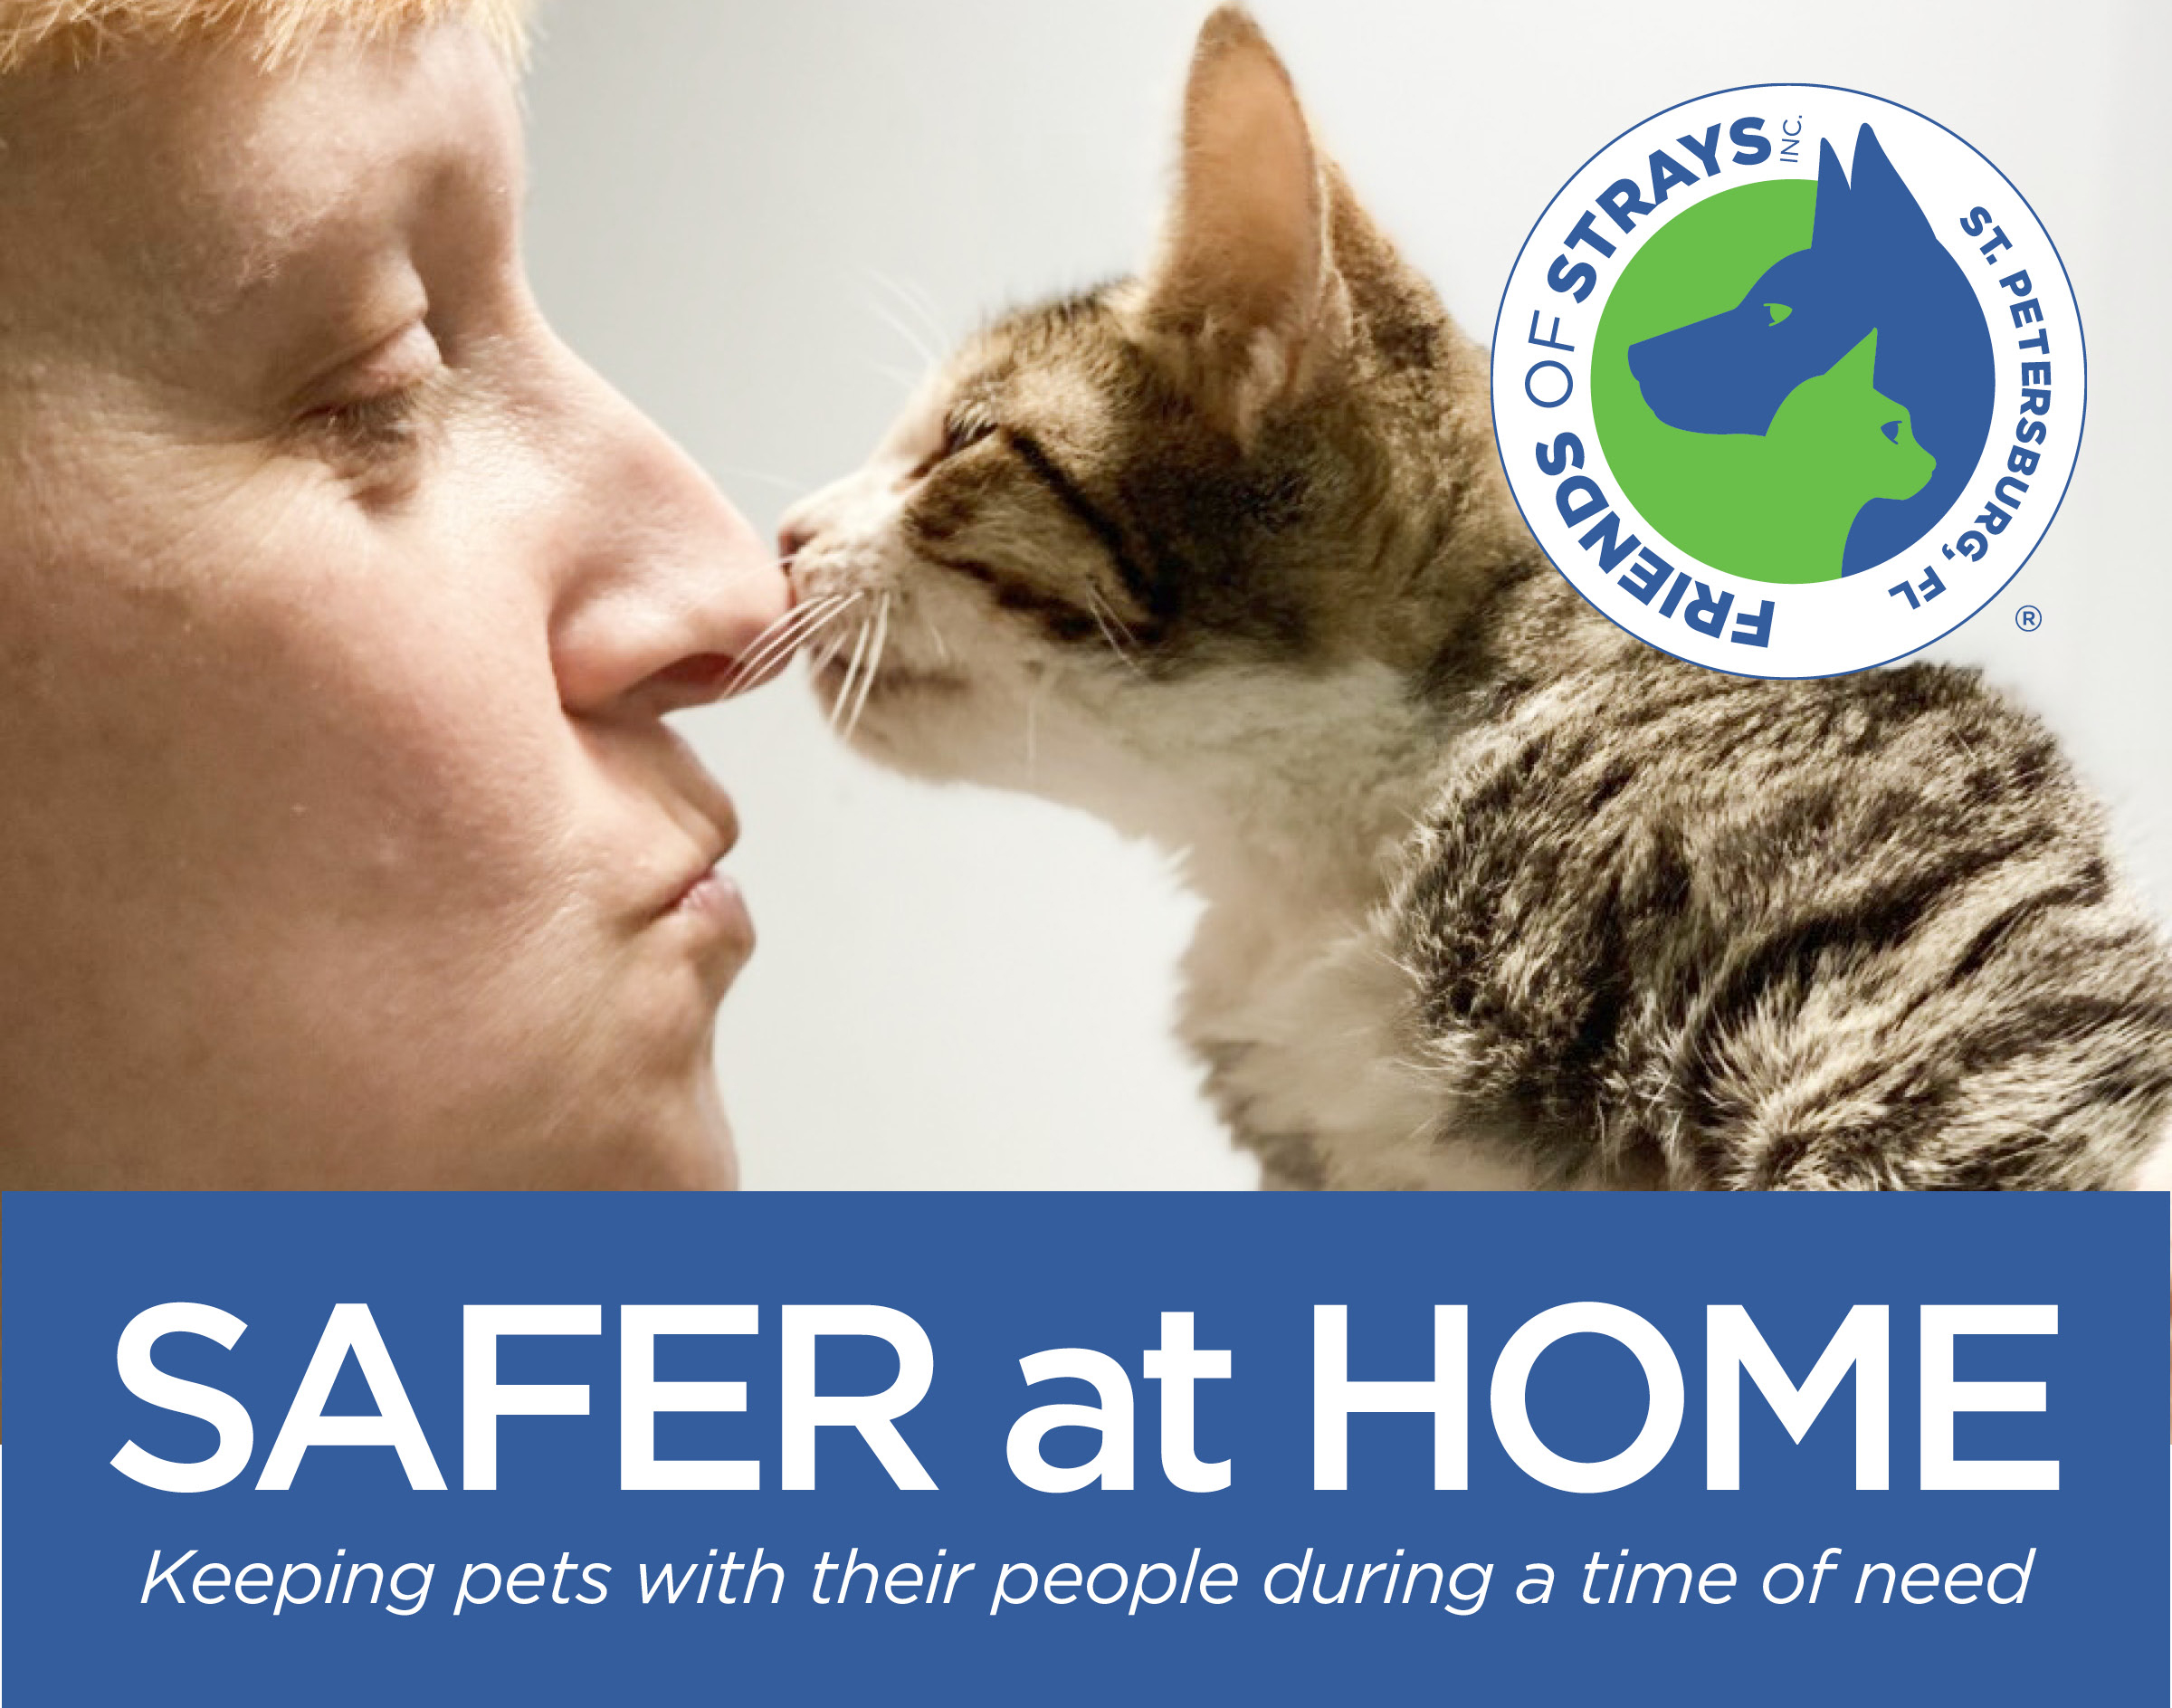 Safer At Home - Friends of Strays Cat and Dog Adoption in St. Petersburg, FL